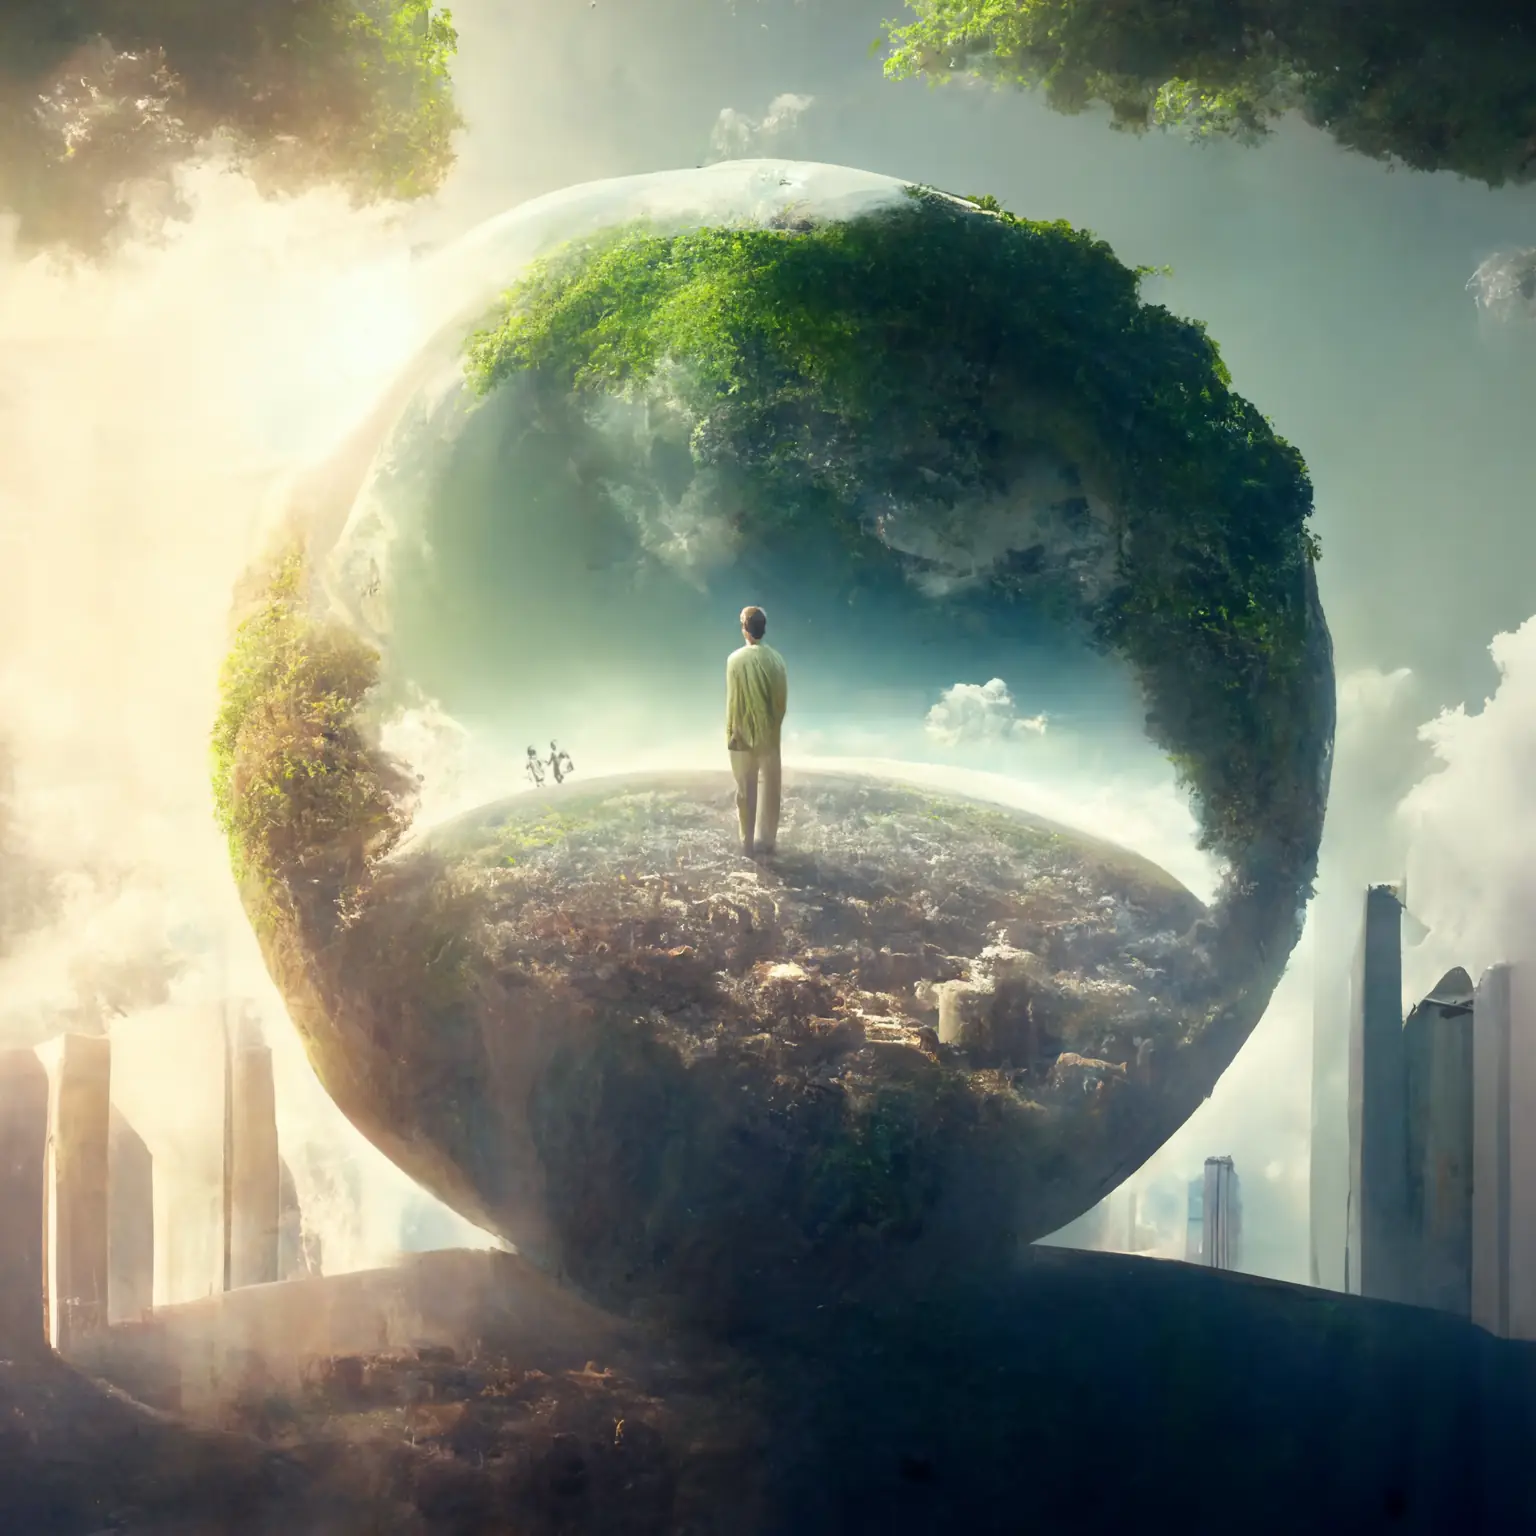 A fantastical image of a human inside an earth like planet. The human is standing on a horizon and is gigantic compared to a city. A planet within a planet. The original planet that the man is within is resting on a hill overlooking skyscrapers in the distance.